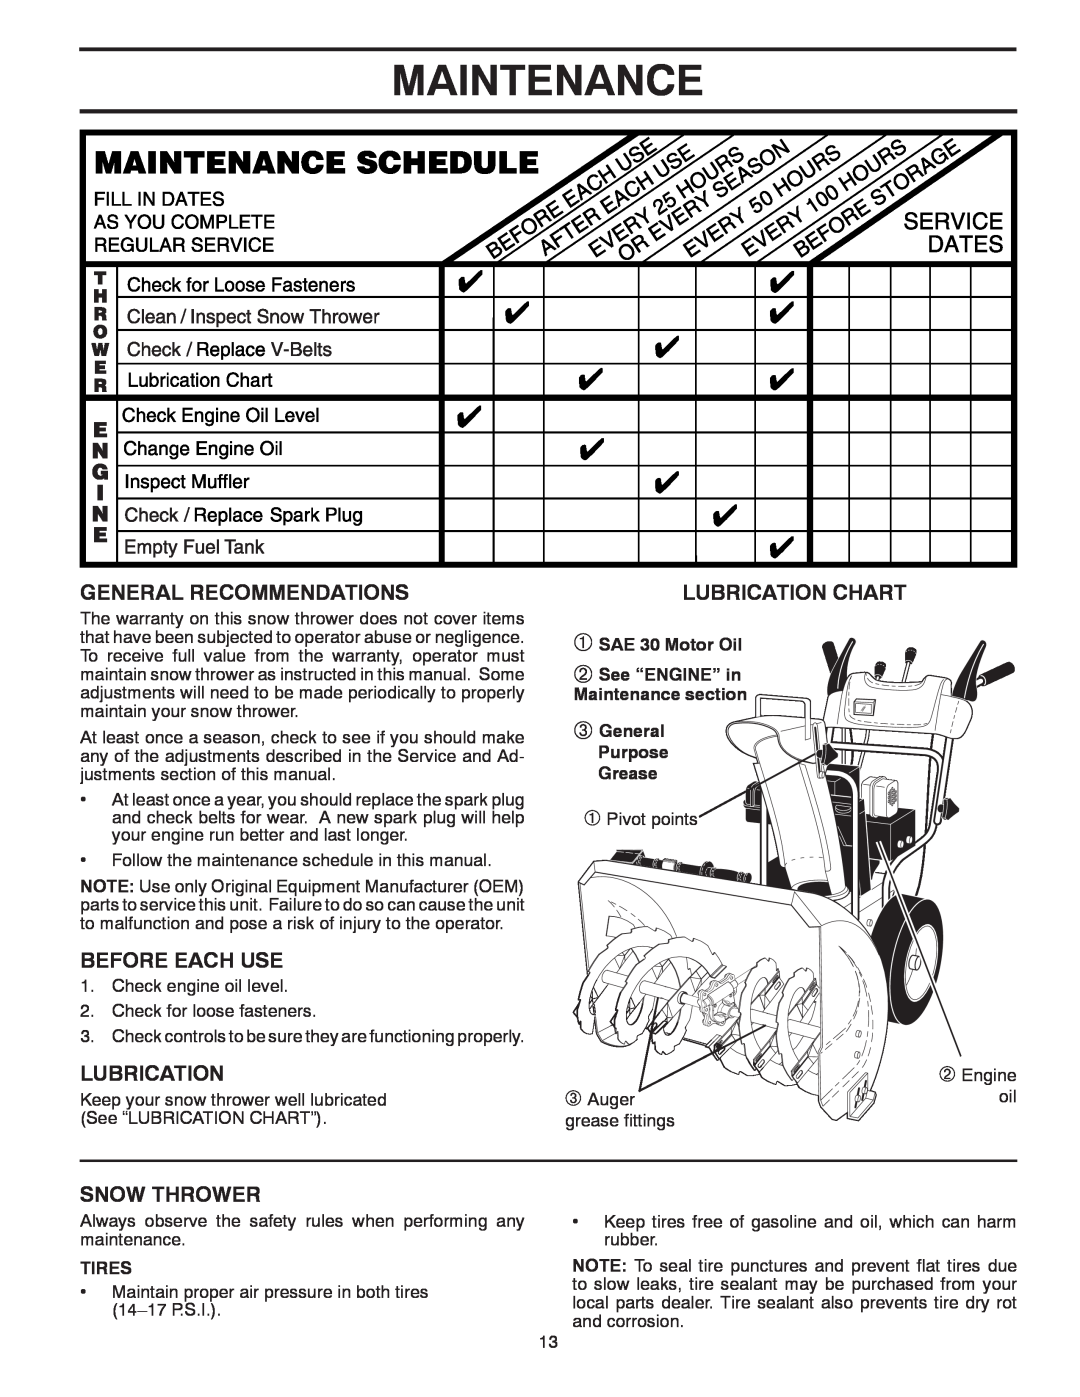 McCulloch 96192004101 Maintenance, General Recommendations, Before Each Use, Snow Thrower, Lubrication Chart, Tires 